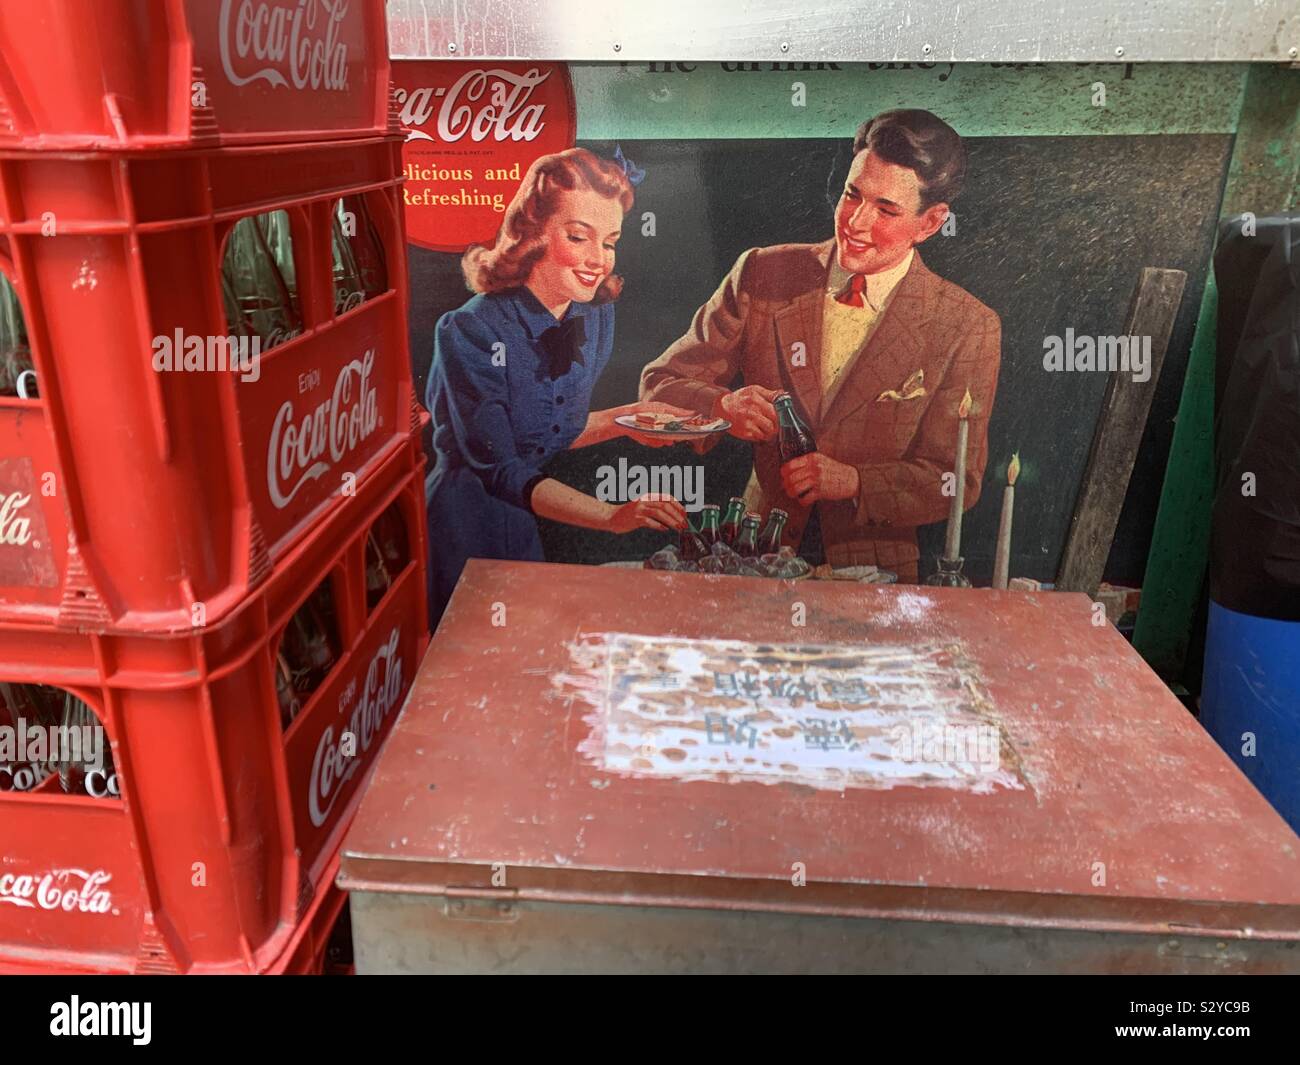 Coca Cola bottles by an old advertisement for Coca Cola in Hong Kong. Stock Photo